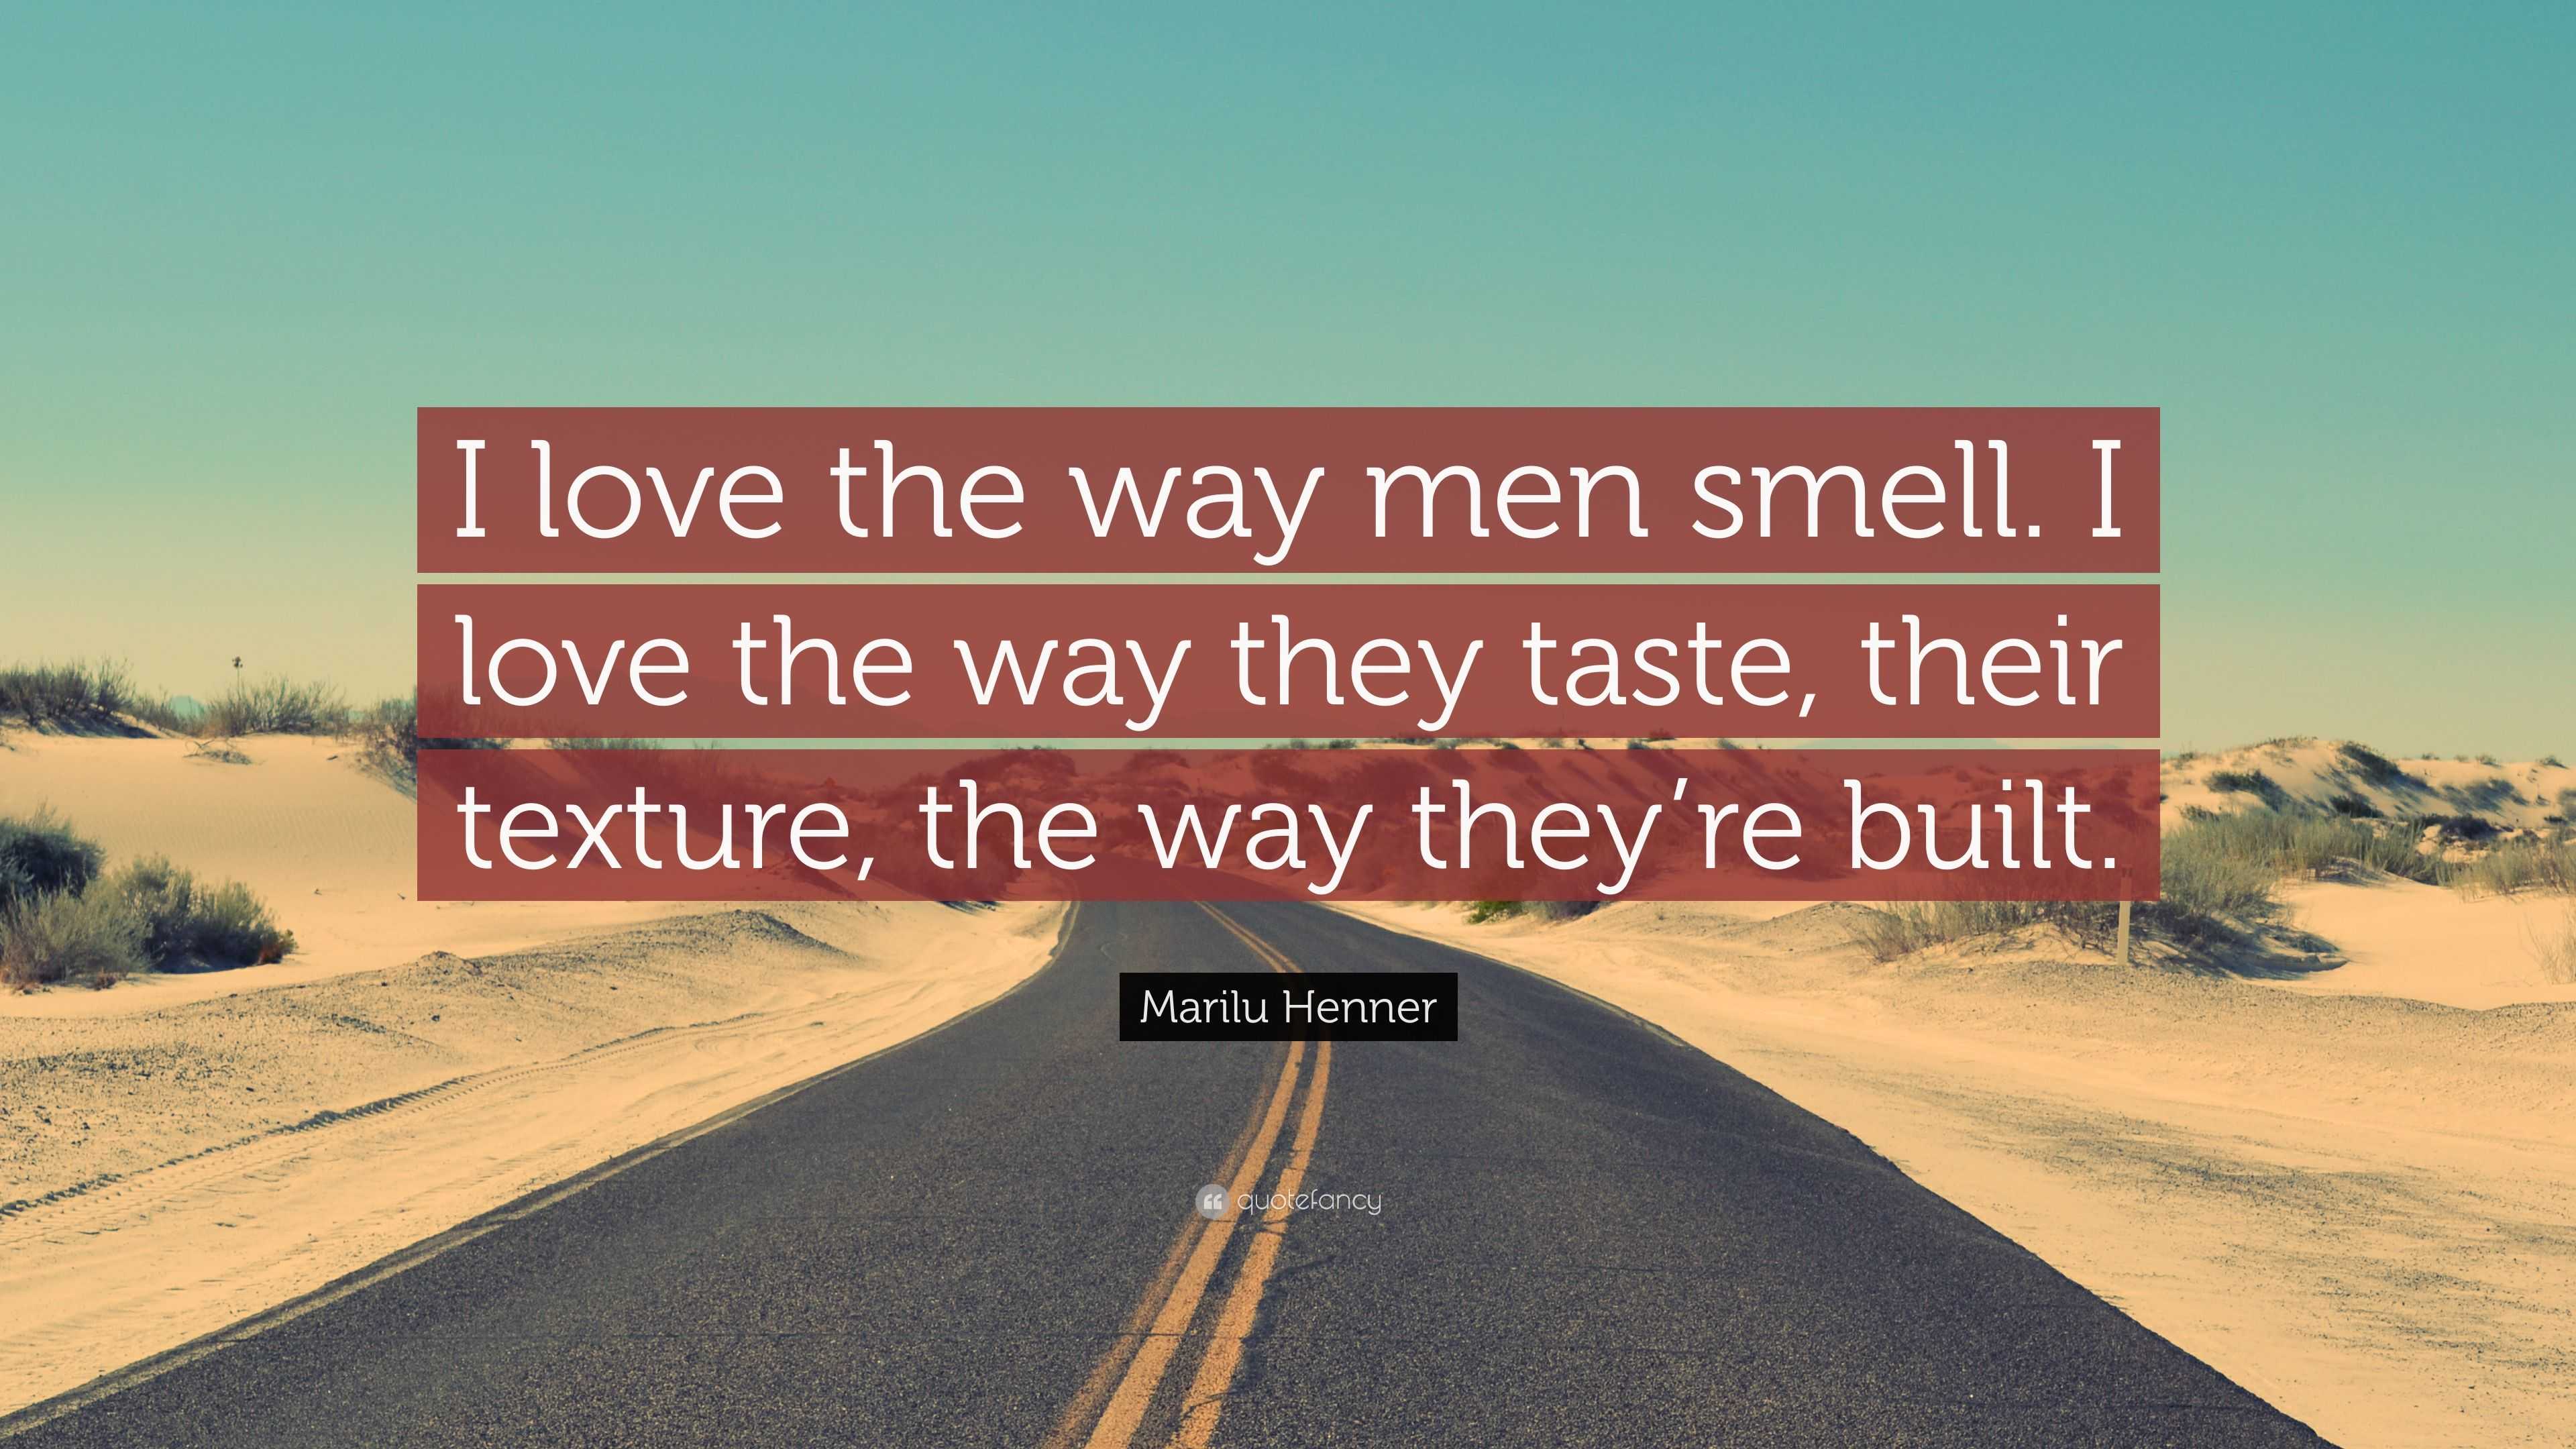 Marilu Henner Quote “I love the way men smell. I love the way they